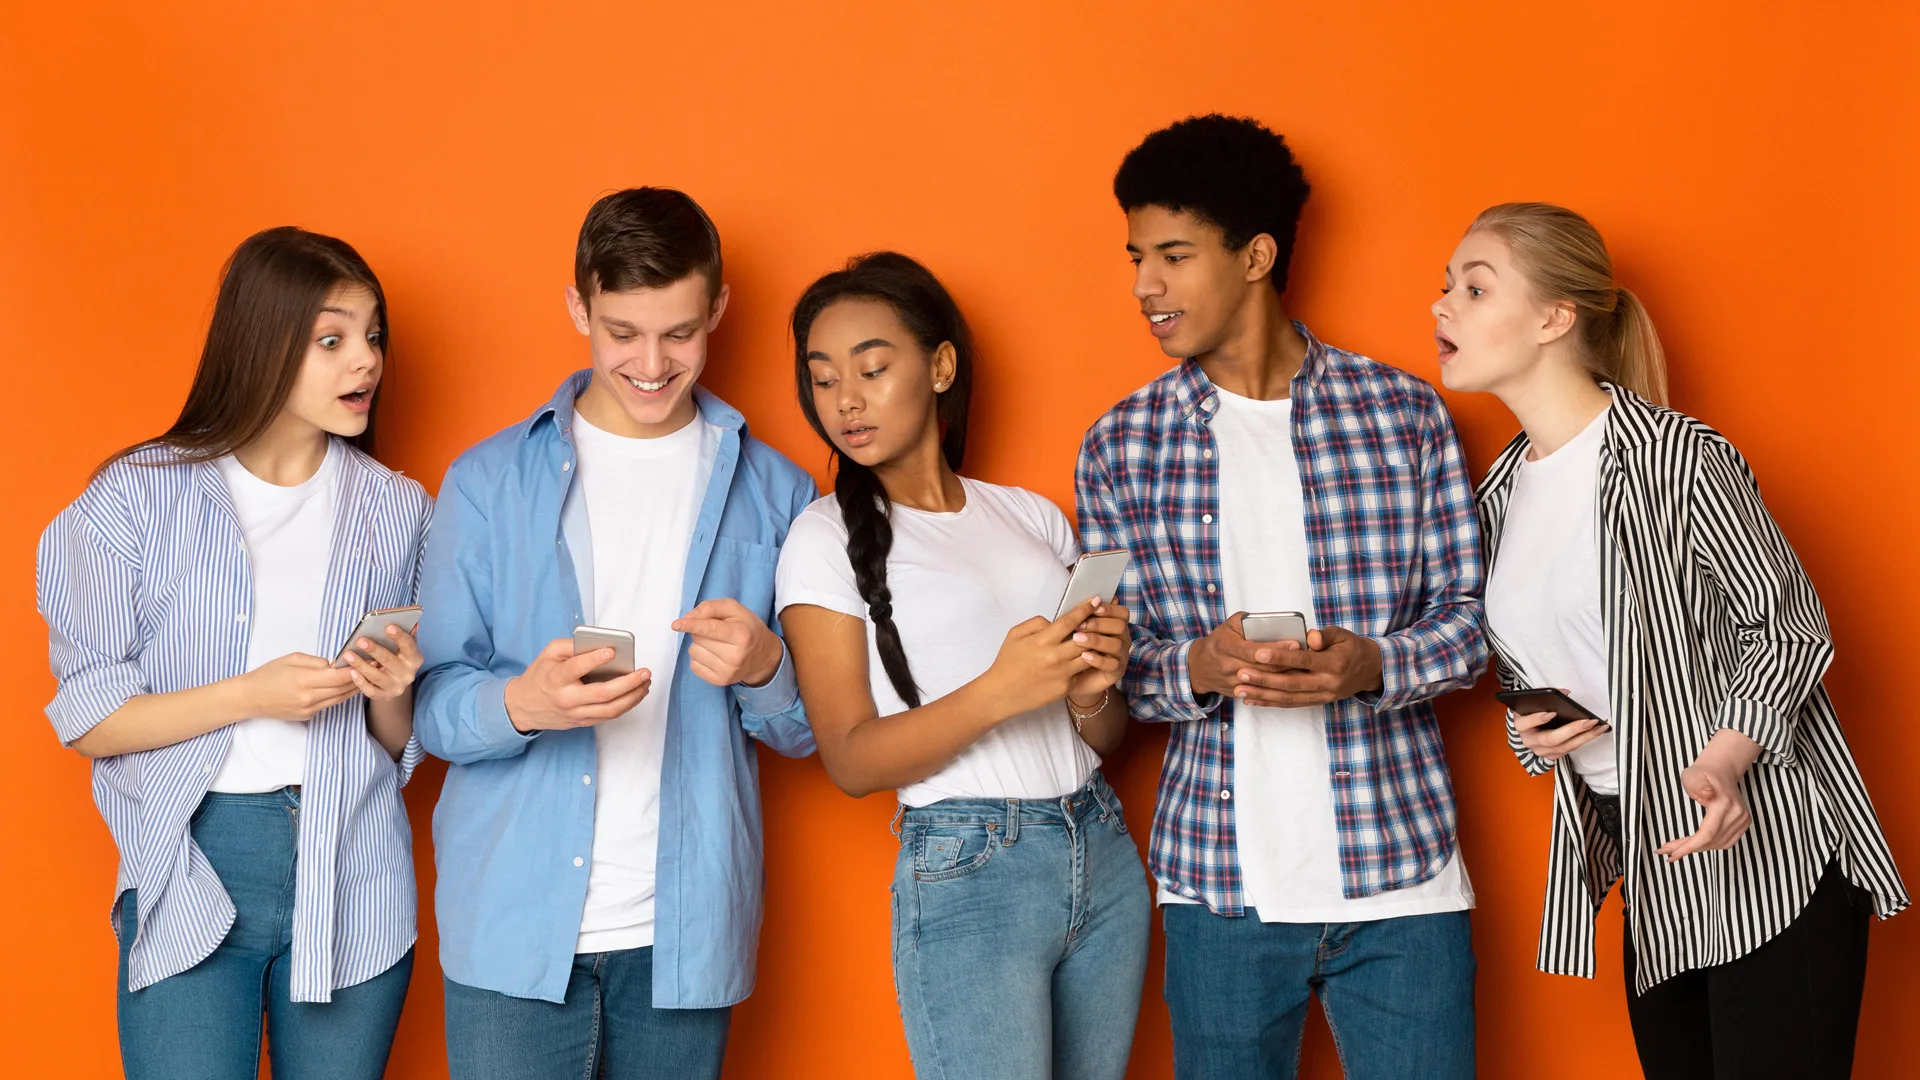 A photograph of teenagers stood in a row on their phones looking at one boys phone. They are all wearing jeans and white tshirts with denim or plaid shirts against an orange background.